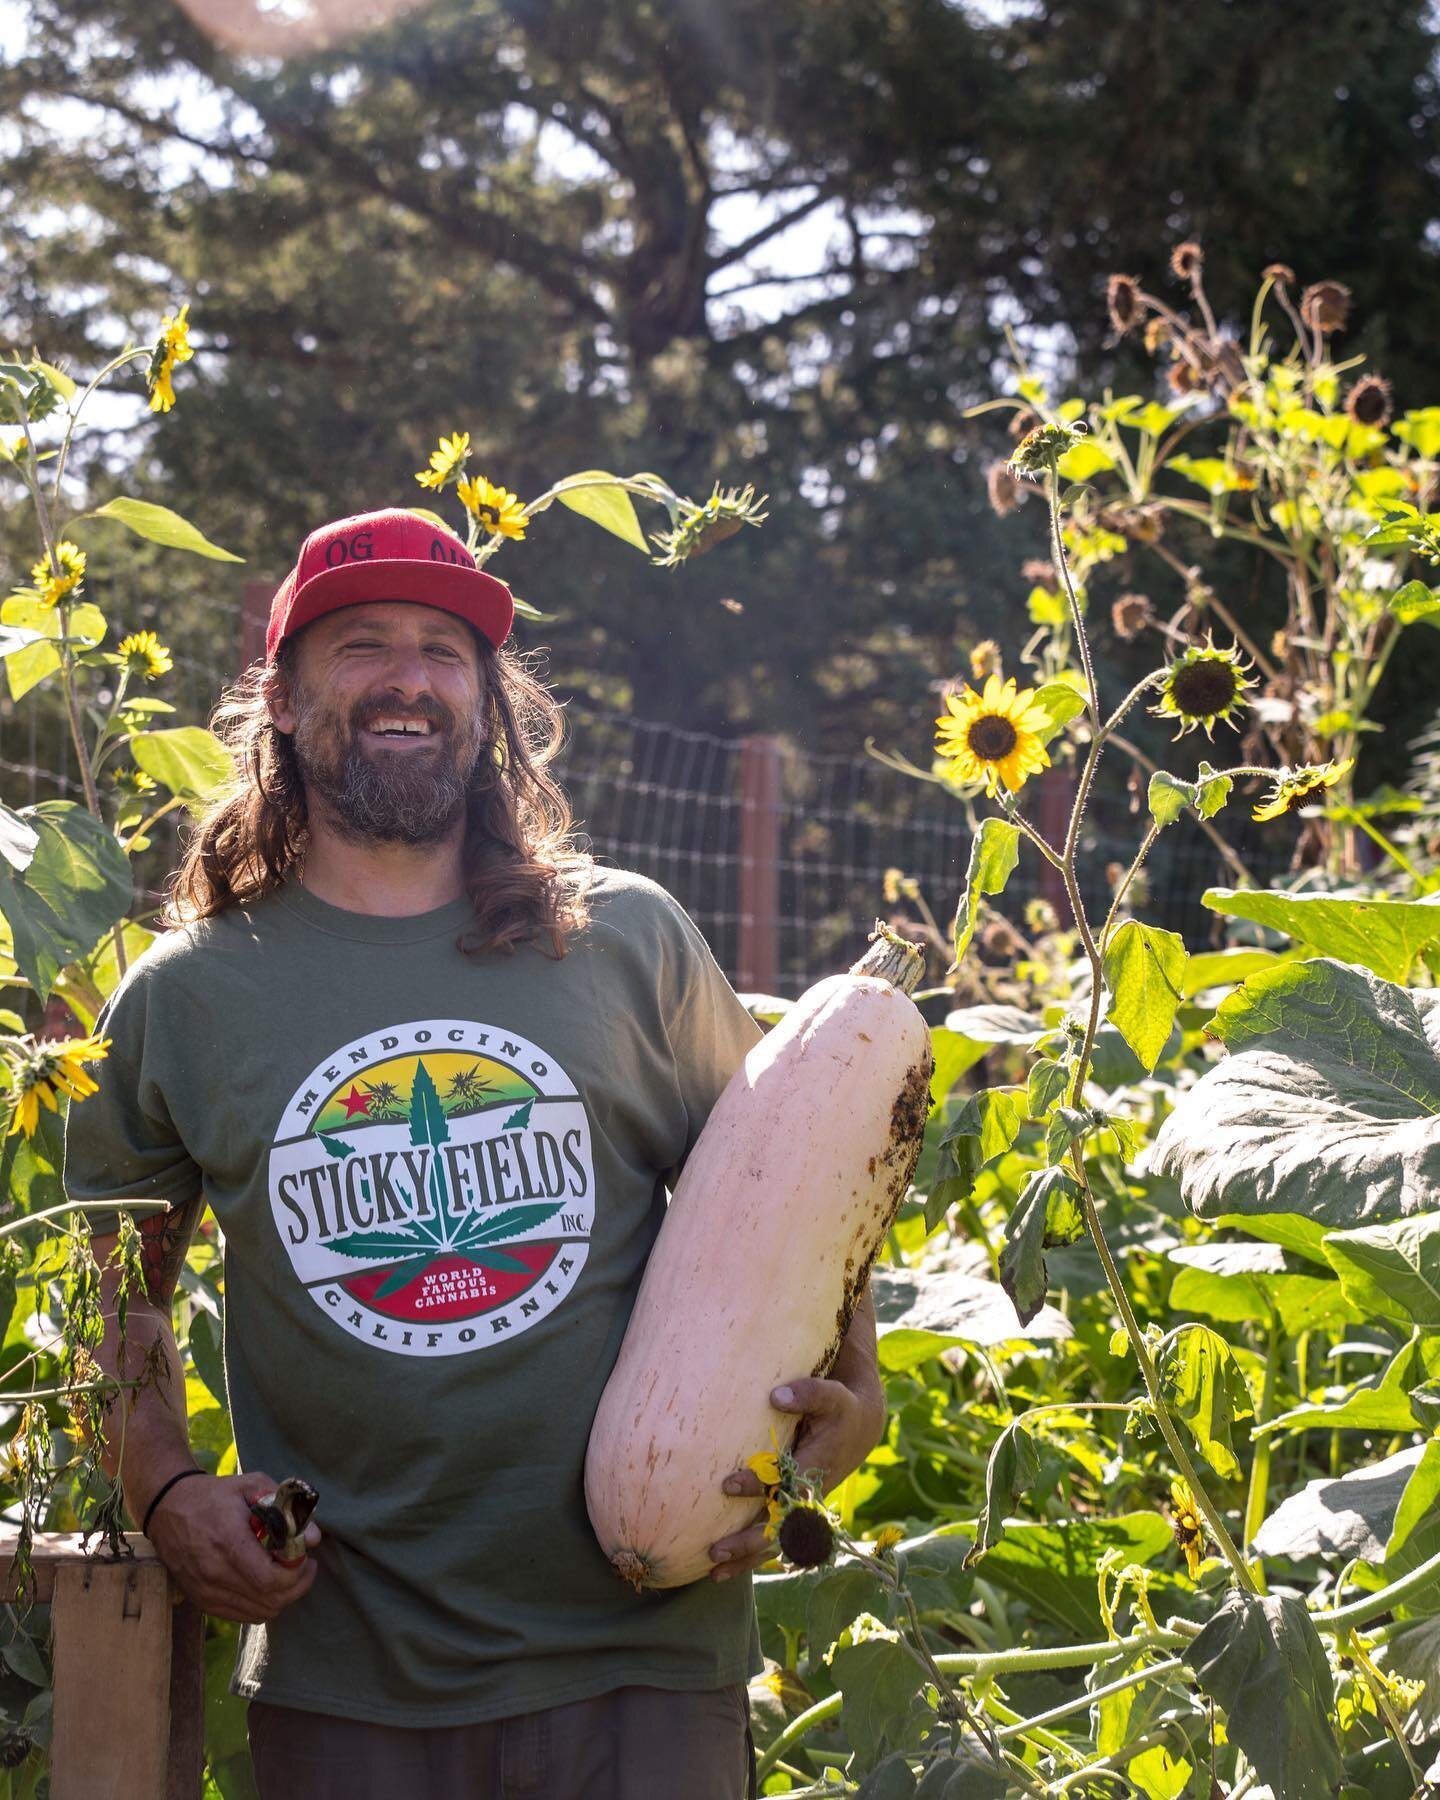 Sticky Fields wants to tour your farm before harvest 2020!
Before harvest 2020 Jesse, Founder of Sticky Fields would like to take a tour of at least three cannabis farms in California. These tours will be filmed for the upcoming Sticky Fields YouTube